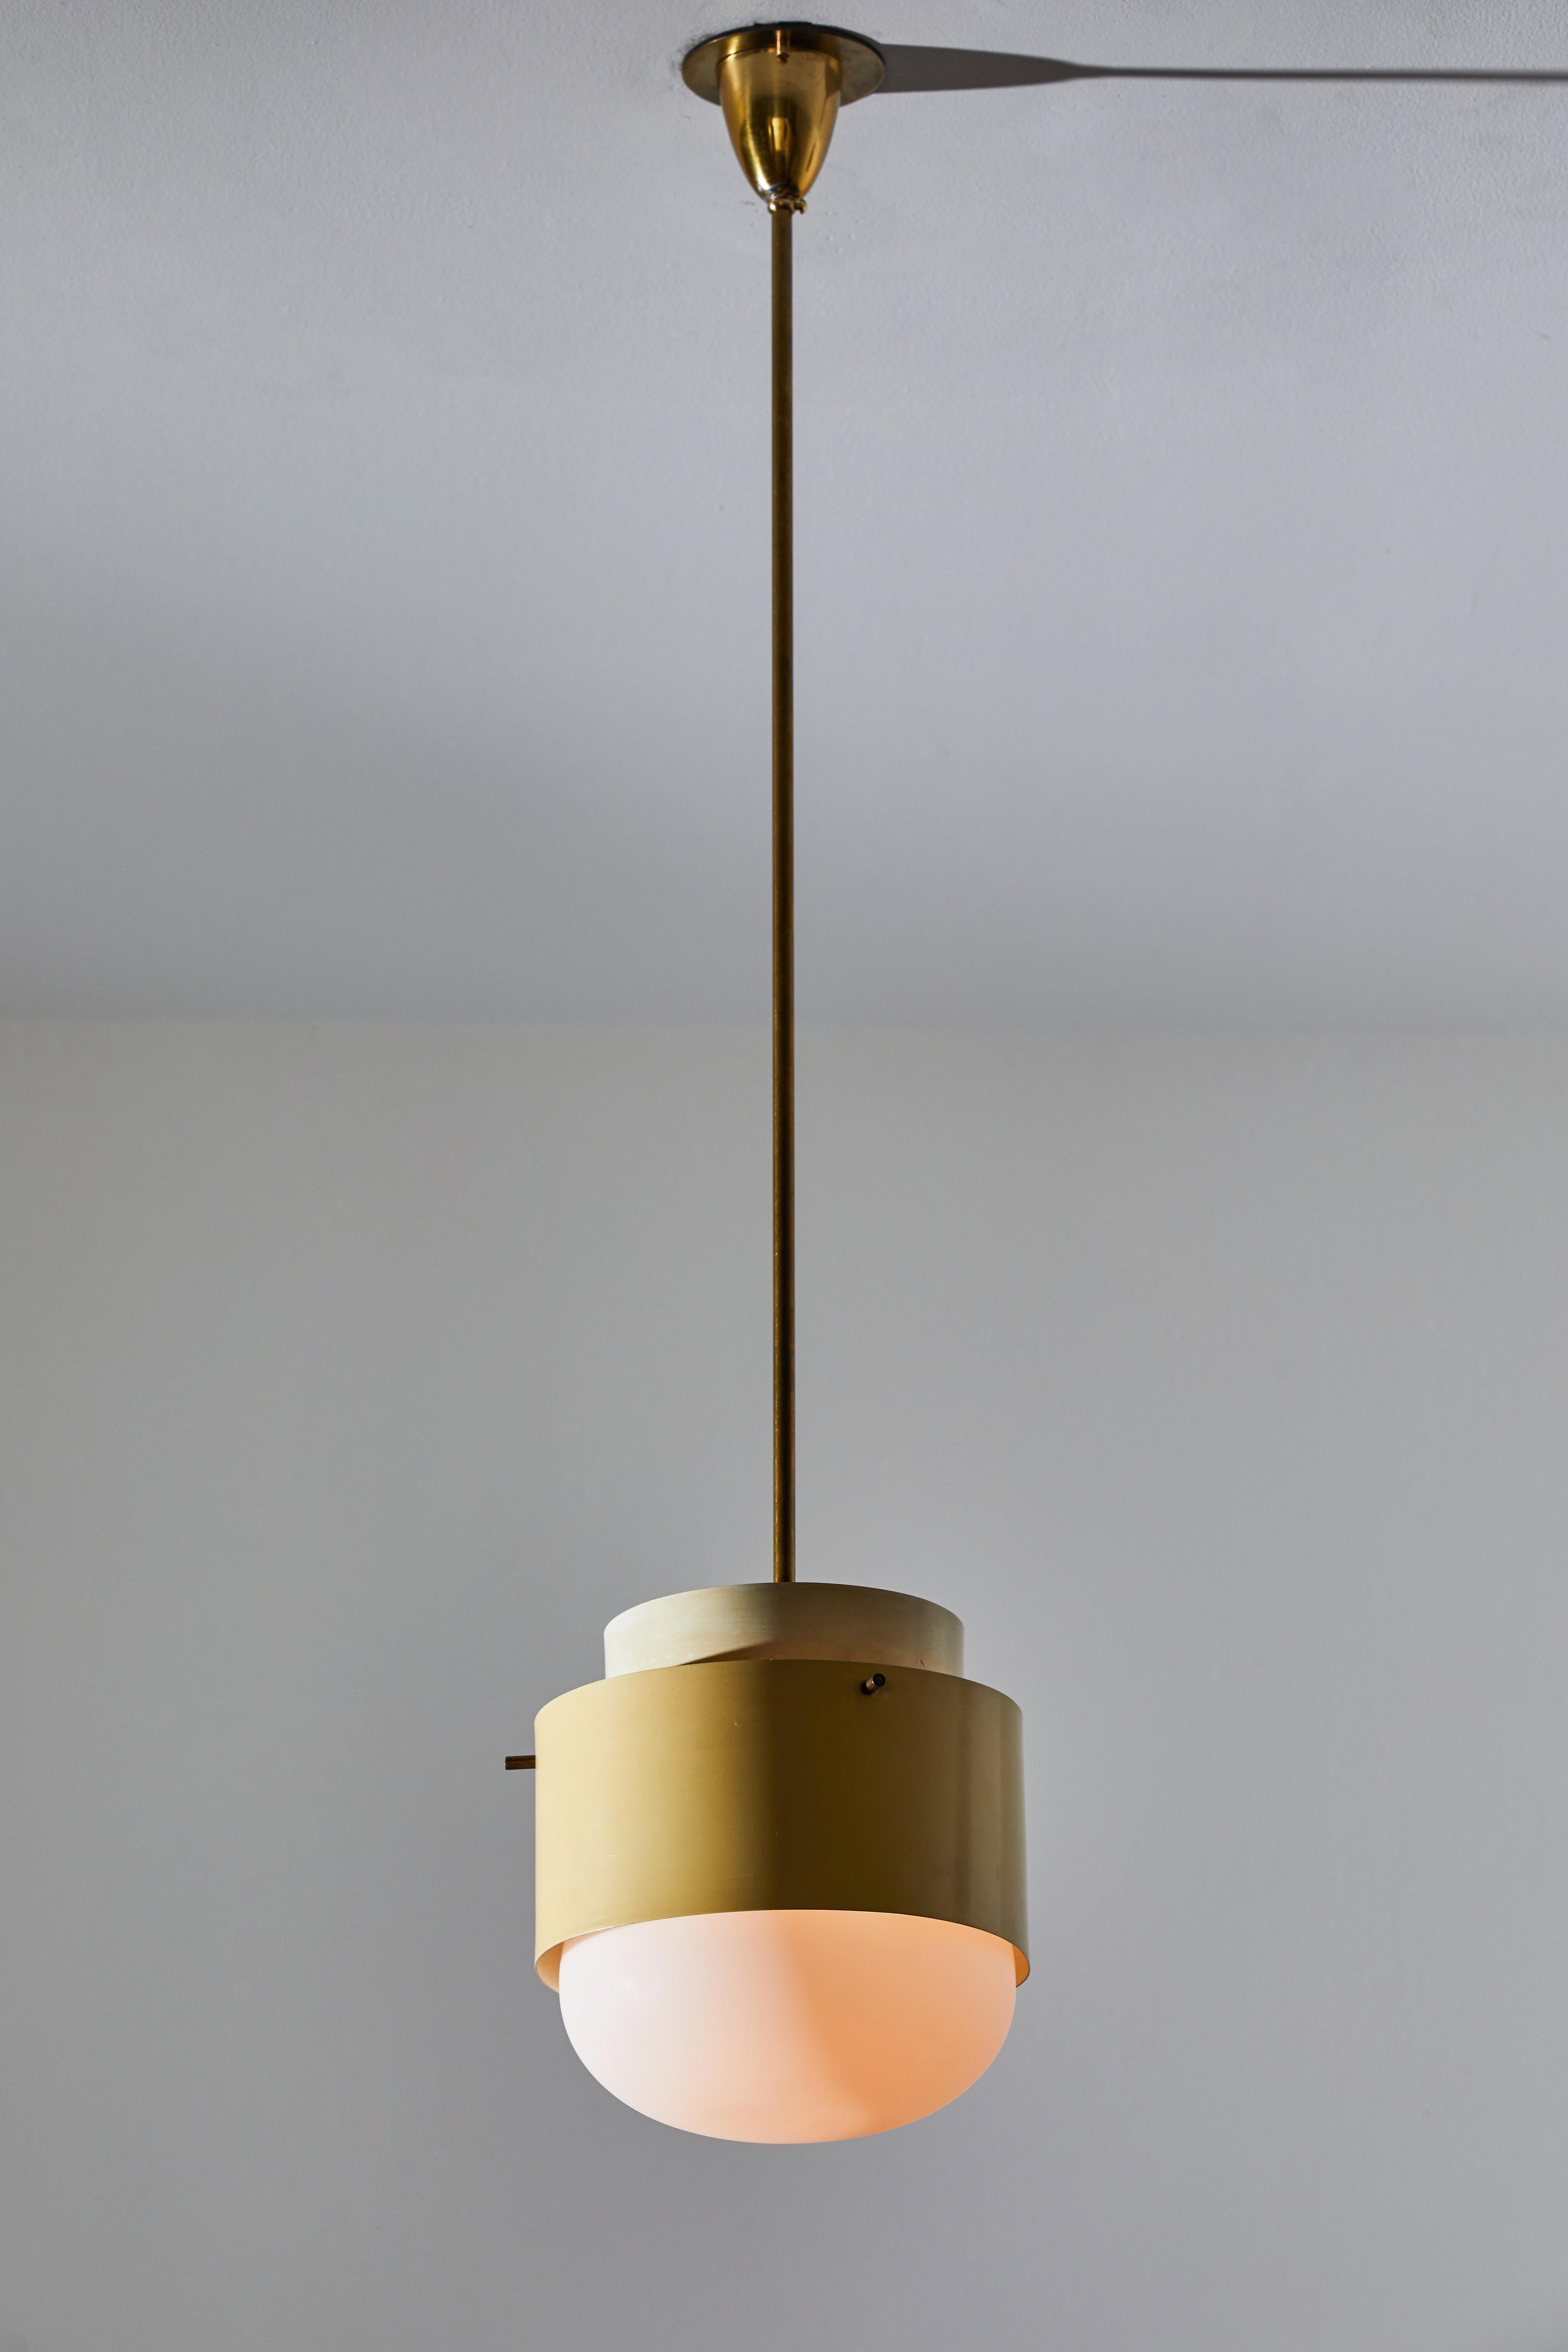 Single Pendant by Stilnovo, circa 1960s. Enameled metal, brushed satin glass diffusers, brass hardware. Rewired for U.S. junction boxes. Original canopy with custom brass ceiling plate. Light takes one E27 100w maximum bulb. QTY: 1 AVAILABLE